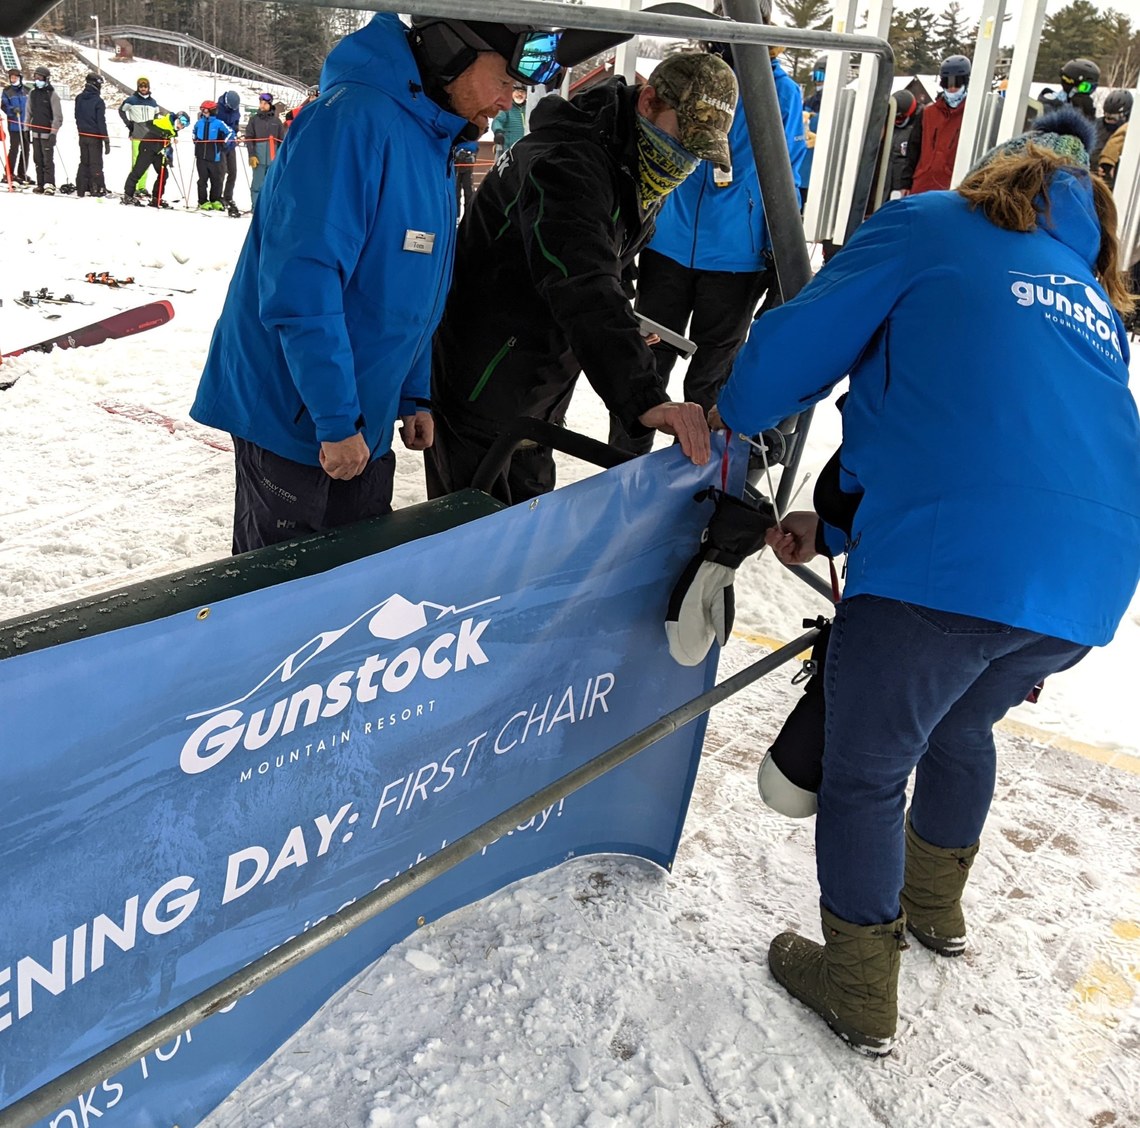 Opening Day banner on first chair